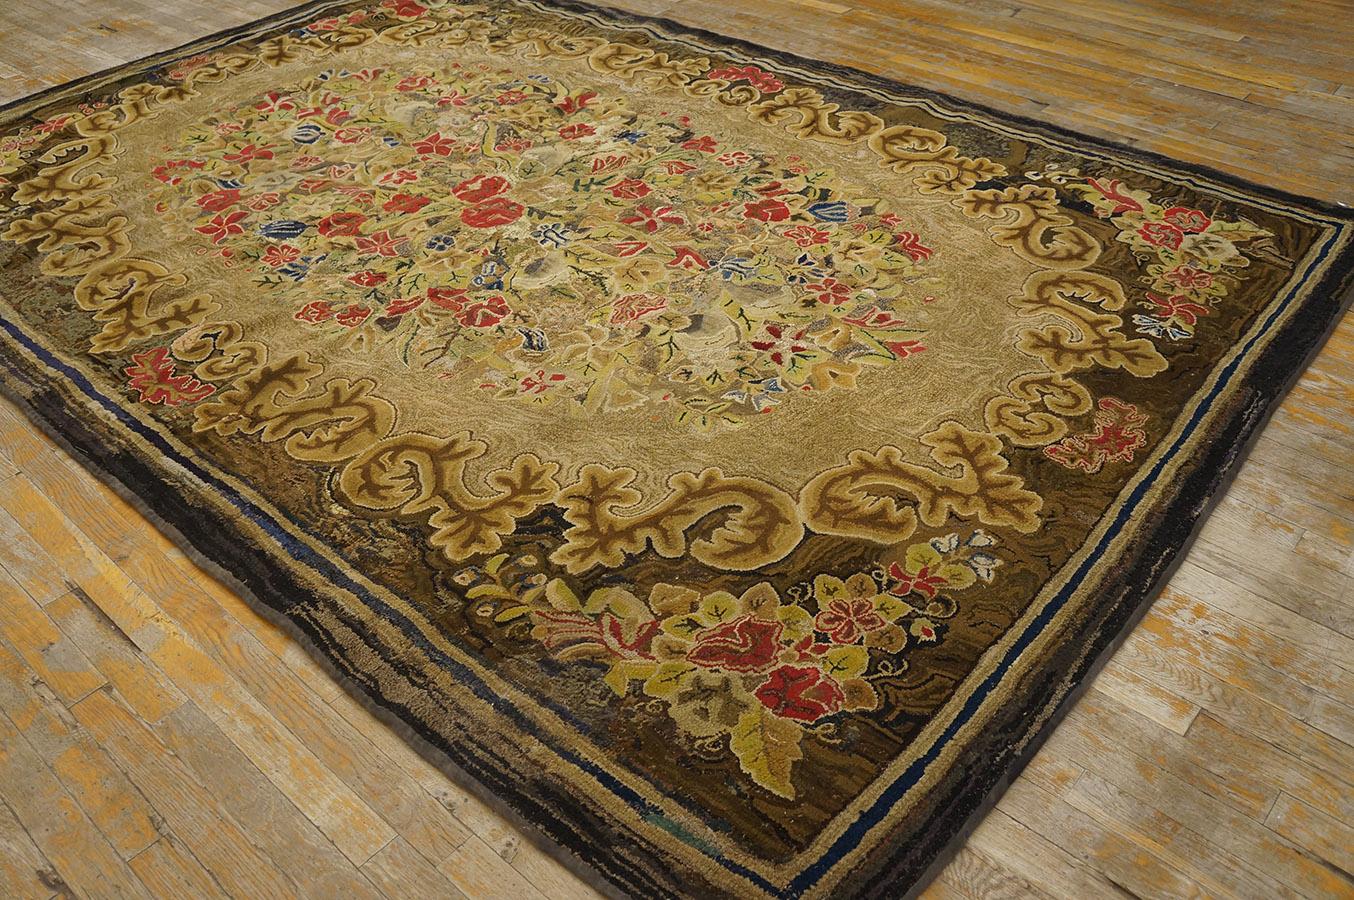 Hand-Woven Antique American Rug 6' 10